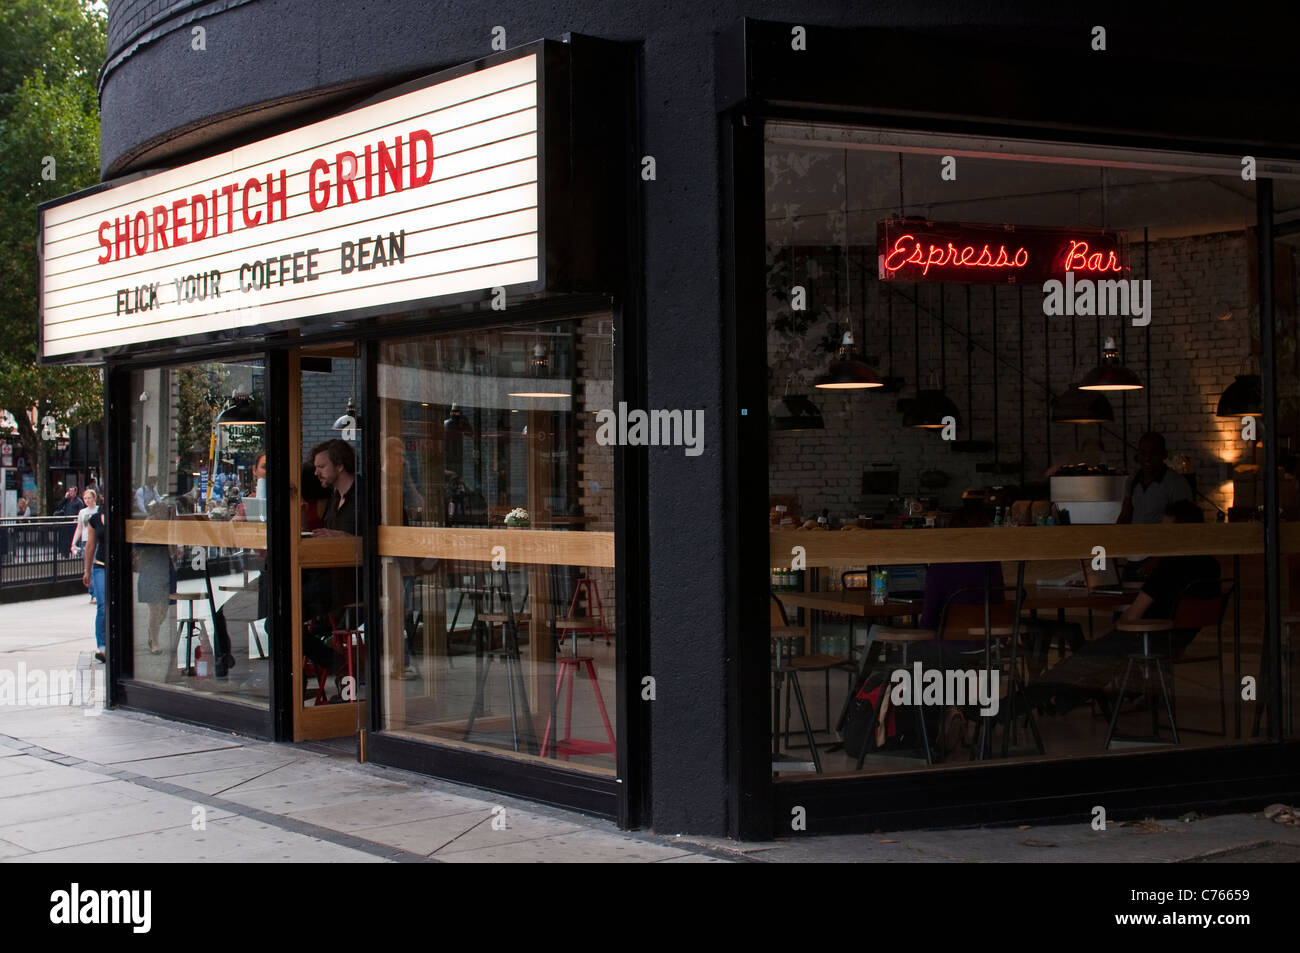 The exterior of the Shoreditch Grind espresso bar, a new cafe in East London on Old Street roundabout, London. Stock Photo